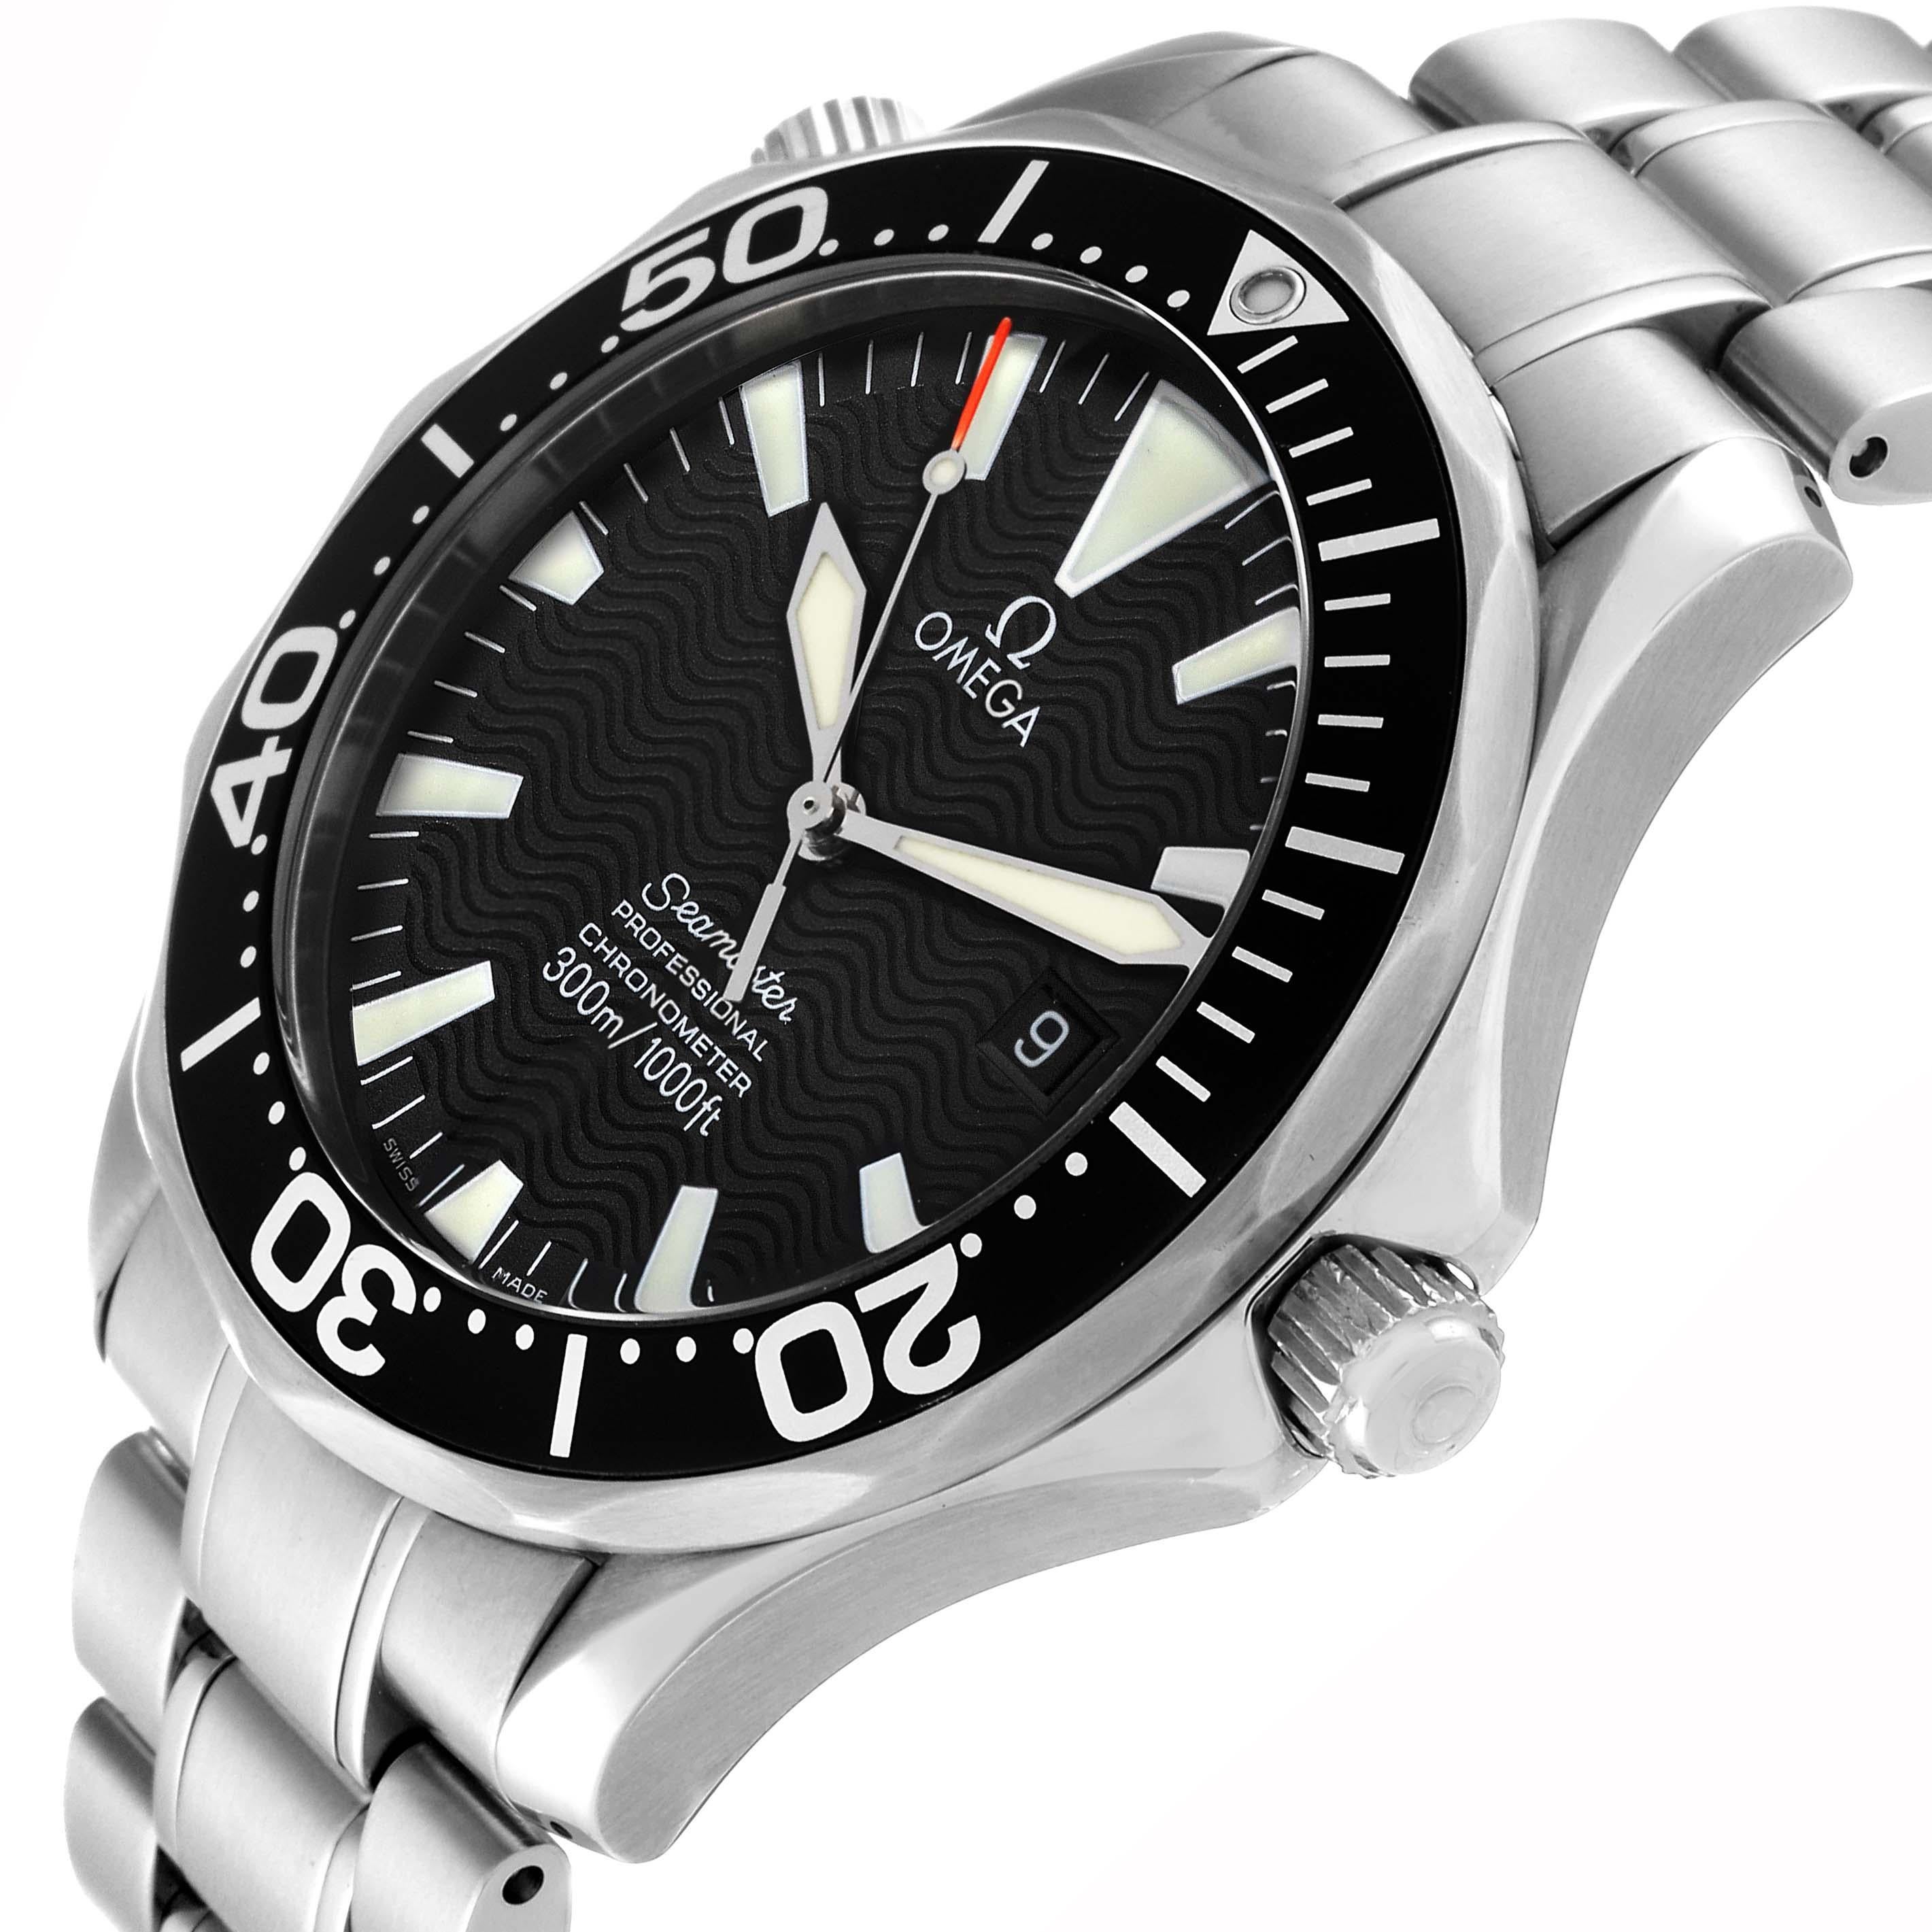 Omega Seamaster Diver 300M Automatic Steel Mens Watch 2254.50.00 Card. Automatic self-winding movement. Stainless steel round case 41.0 mm in diameter. Black unidirectional rotating bezel. Scratch resistant sapphire crystal. Black wave decor dial